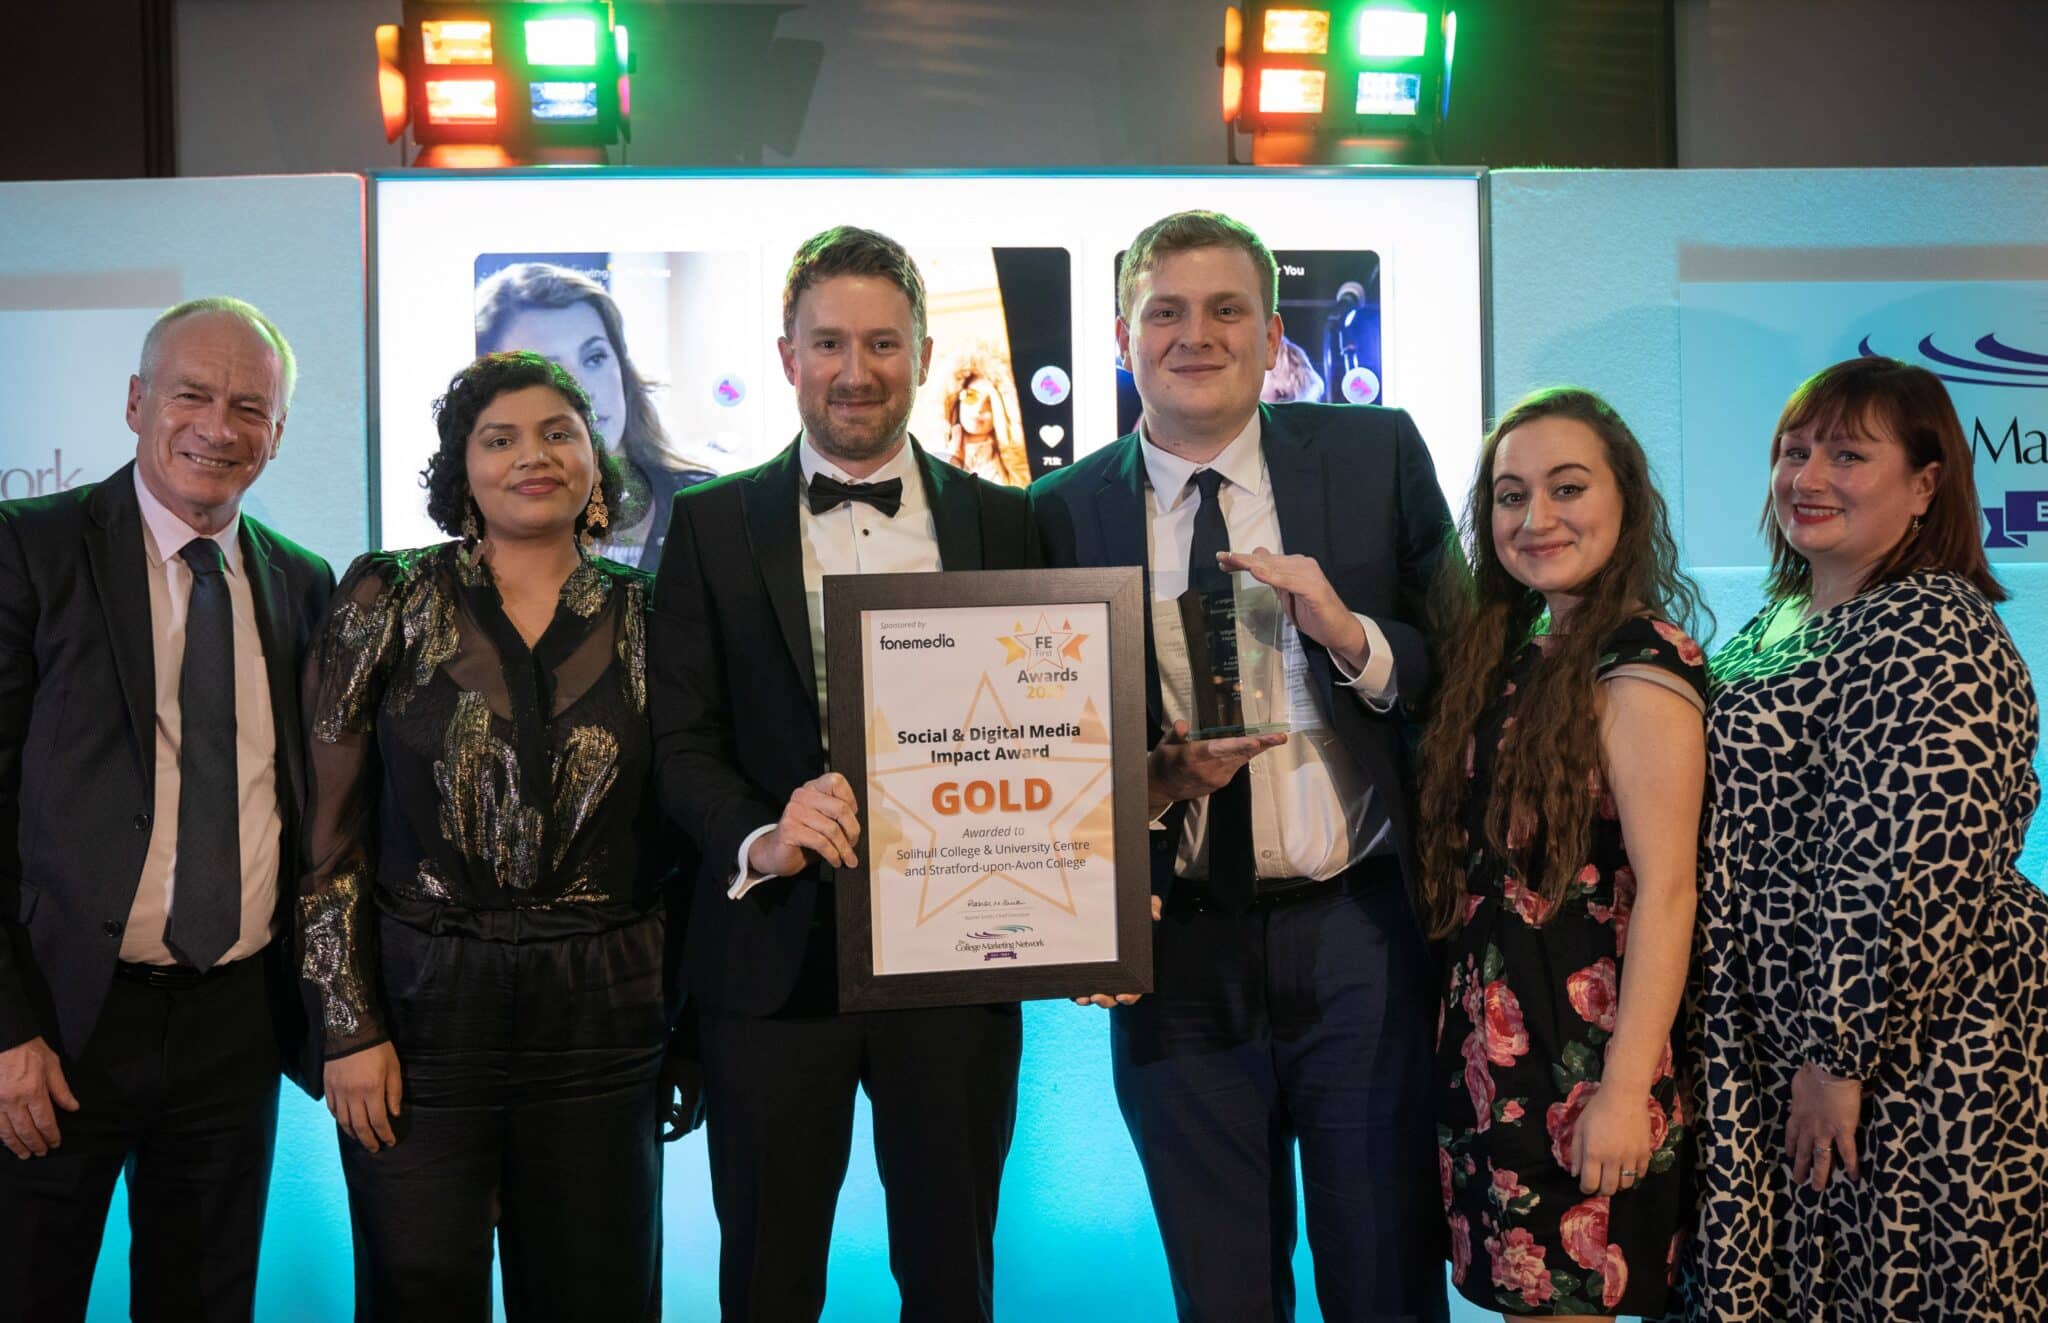 The College's Marketing Team receiving their award